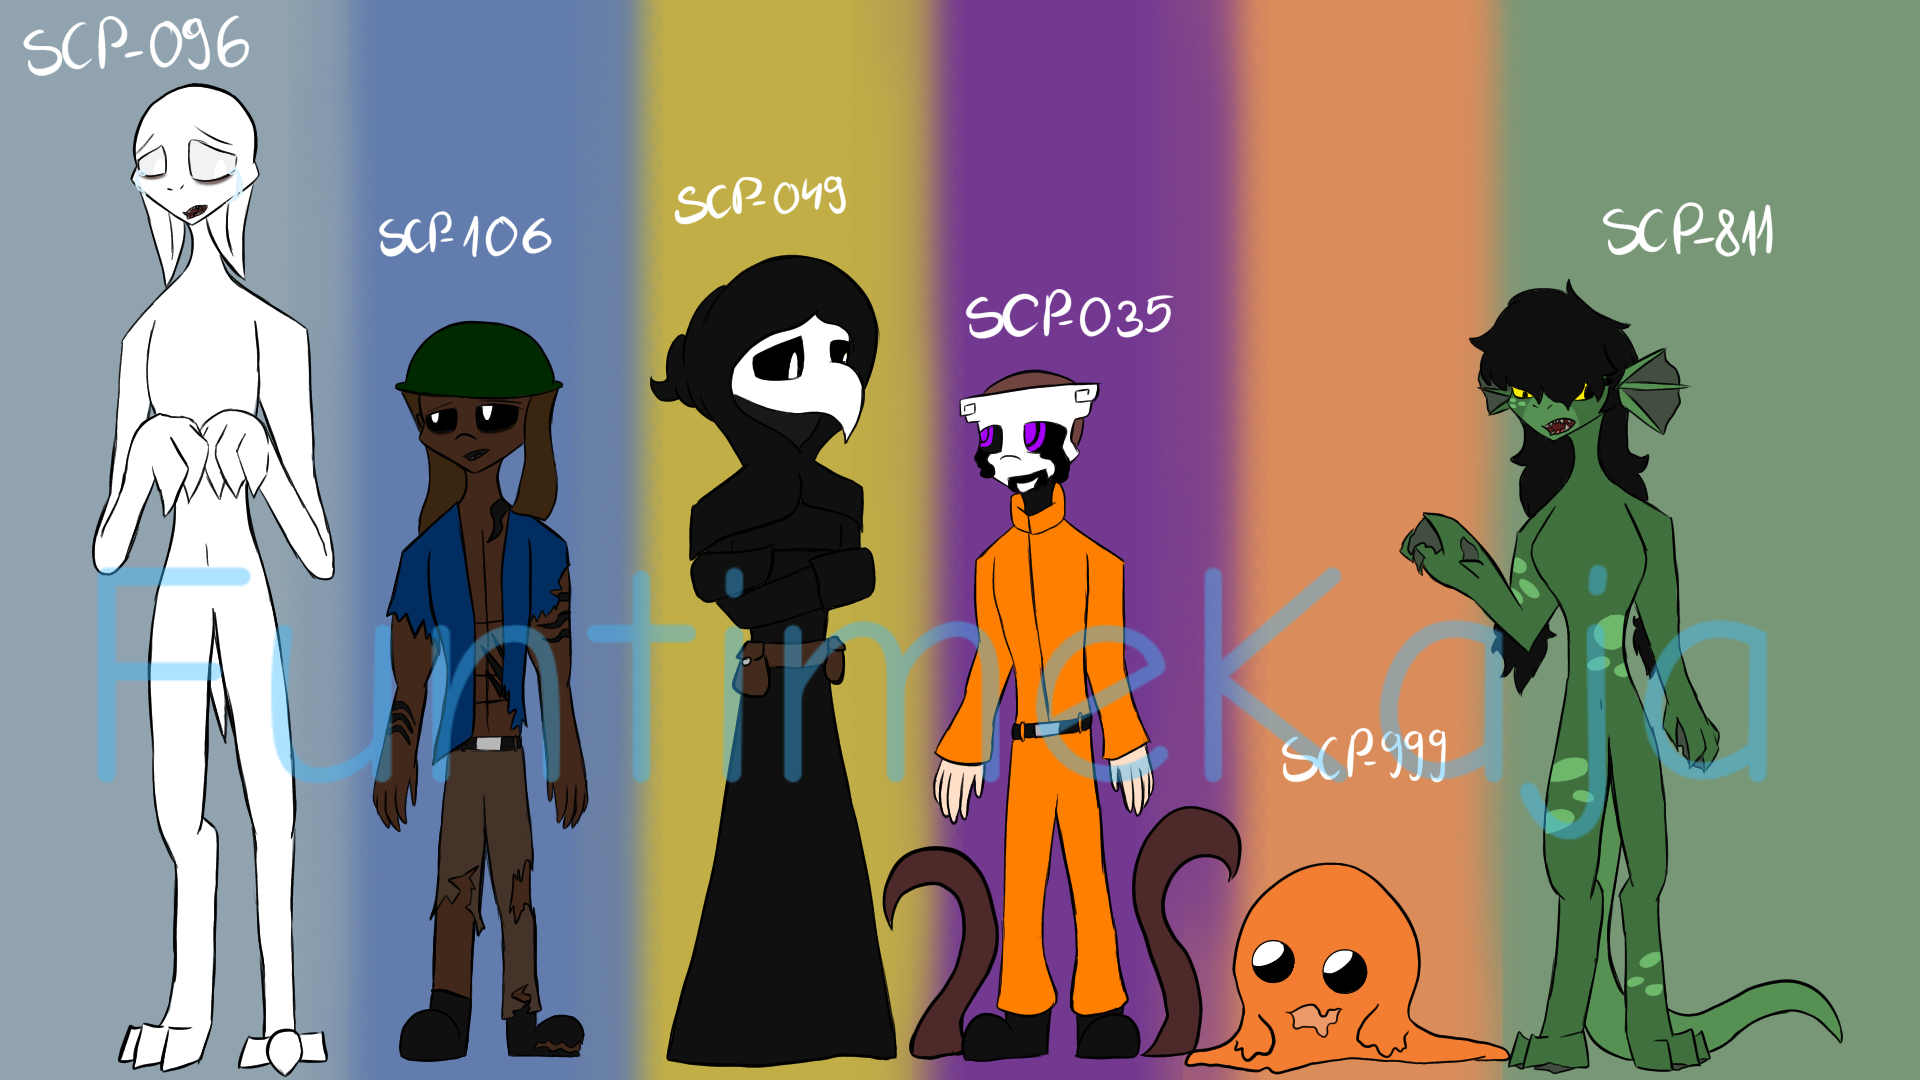 Ignota's SCP Foundation Pixel Fanart - SCP Foundation